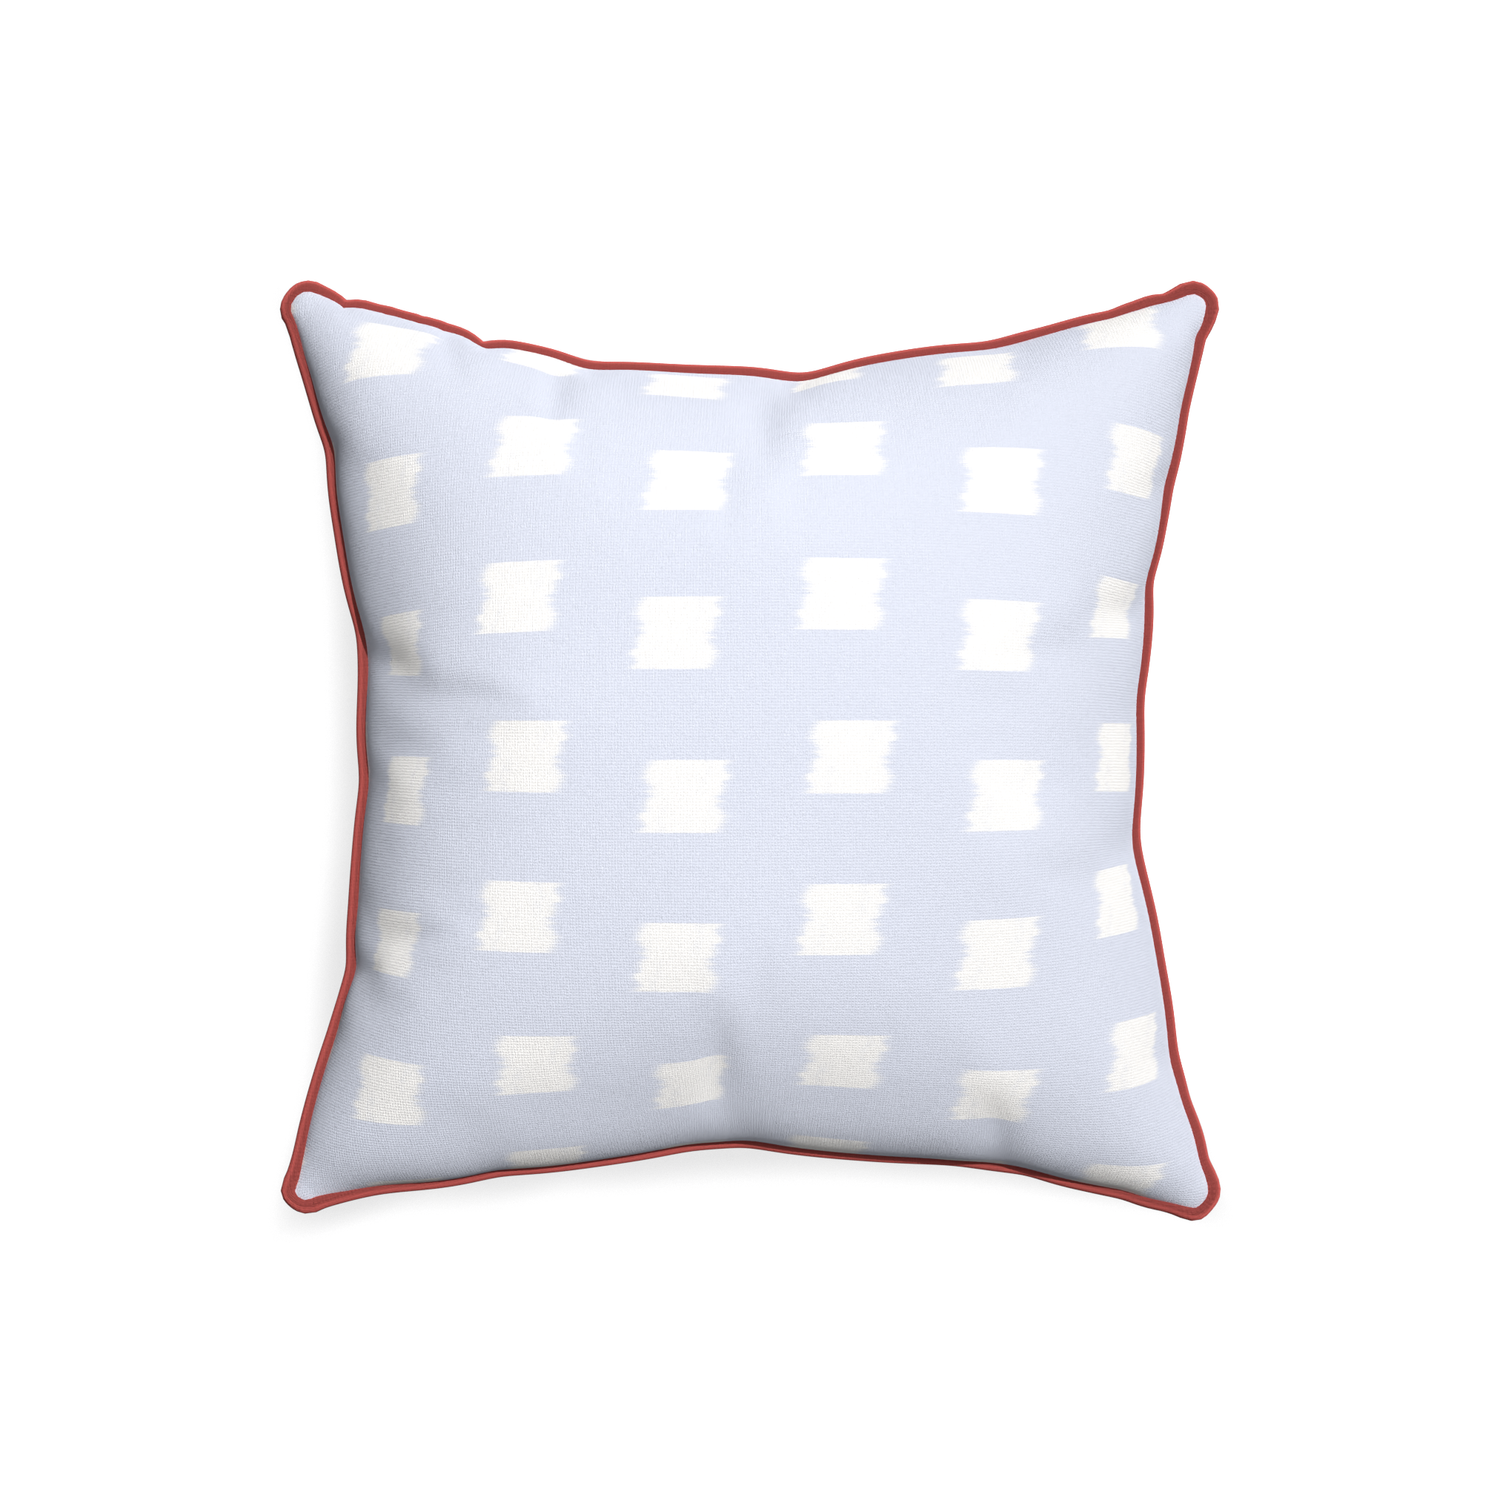 20-square denton custom sky blue patternpillow with c piping on white background